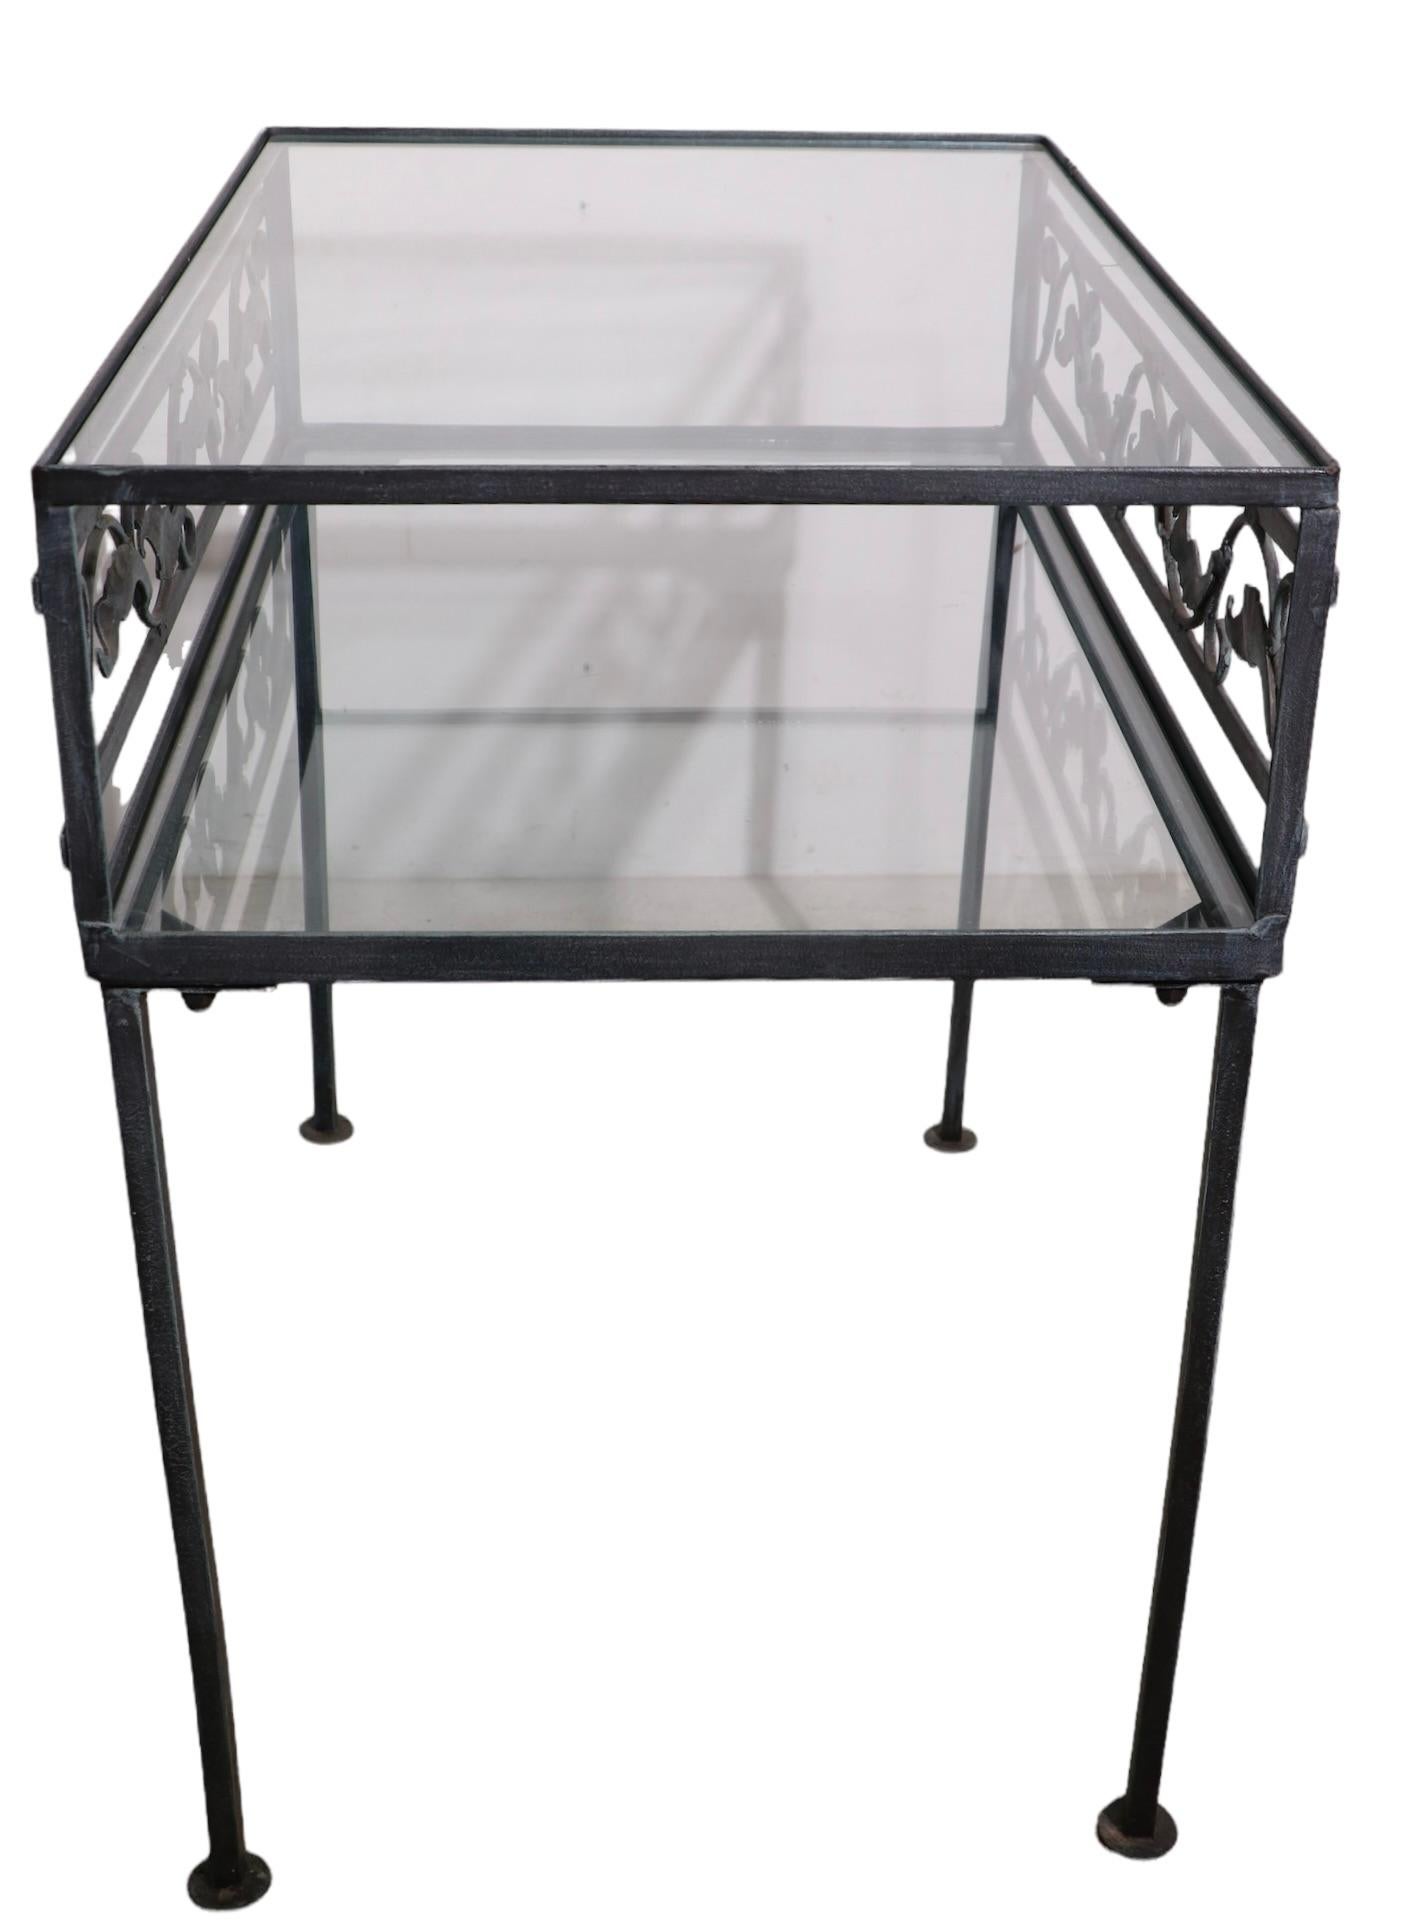 Wrought Iron and Glass Two Tier Garden Patio Table by Meadowcraft In Good Condition For Sale In New York, NY